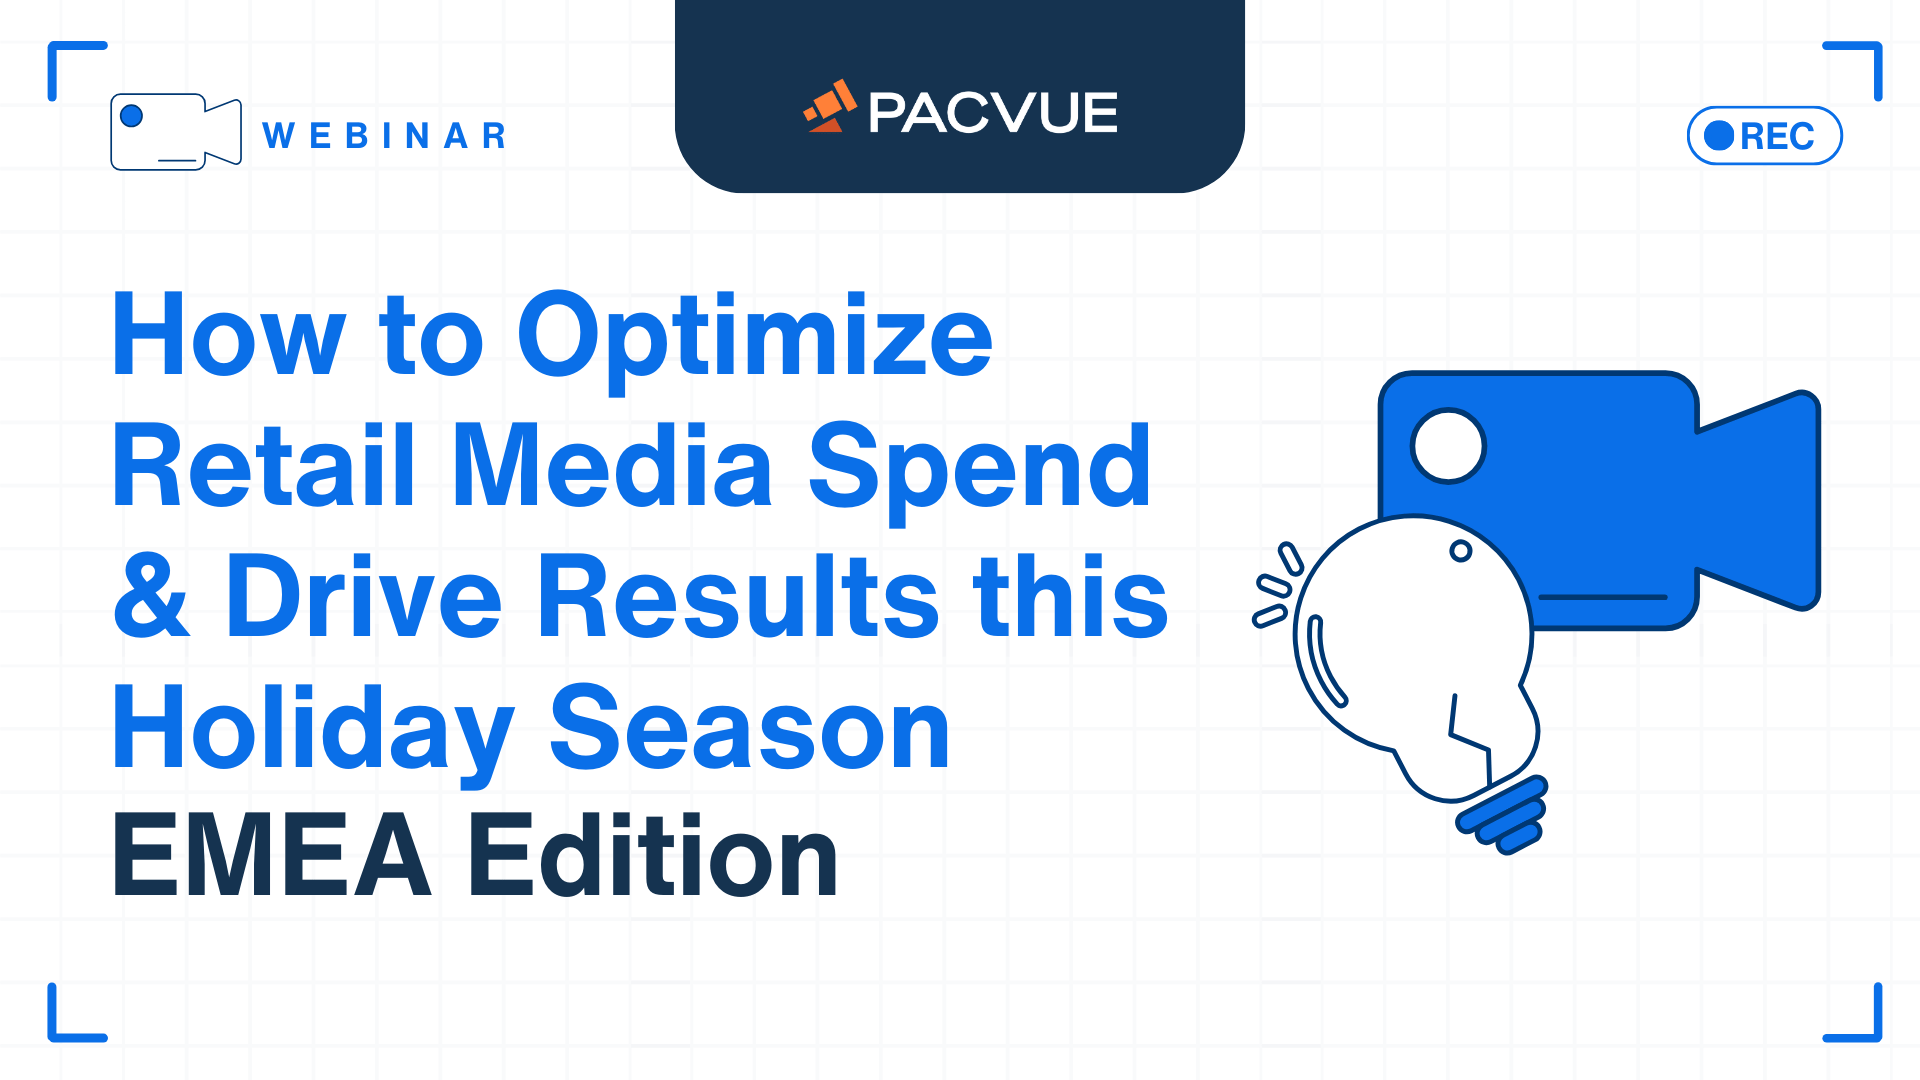 How to Optimize Retail Media Spend & Drive Results this Holiday Season – EMEA Edition